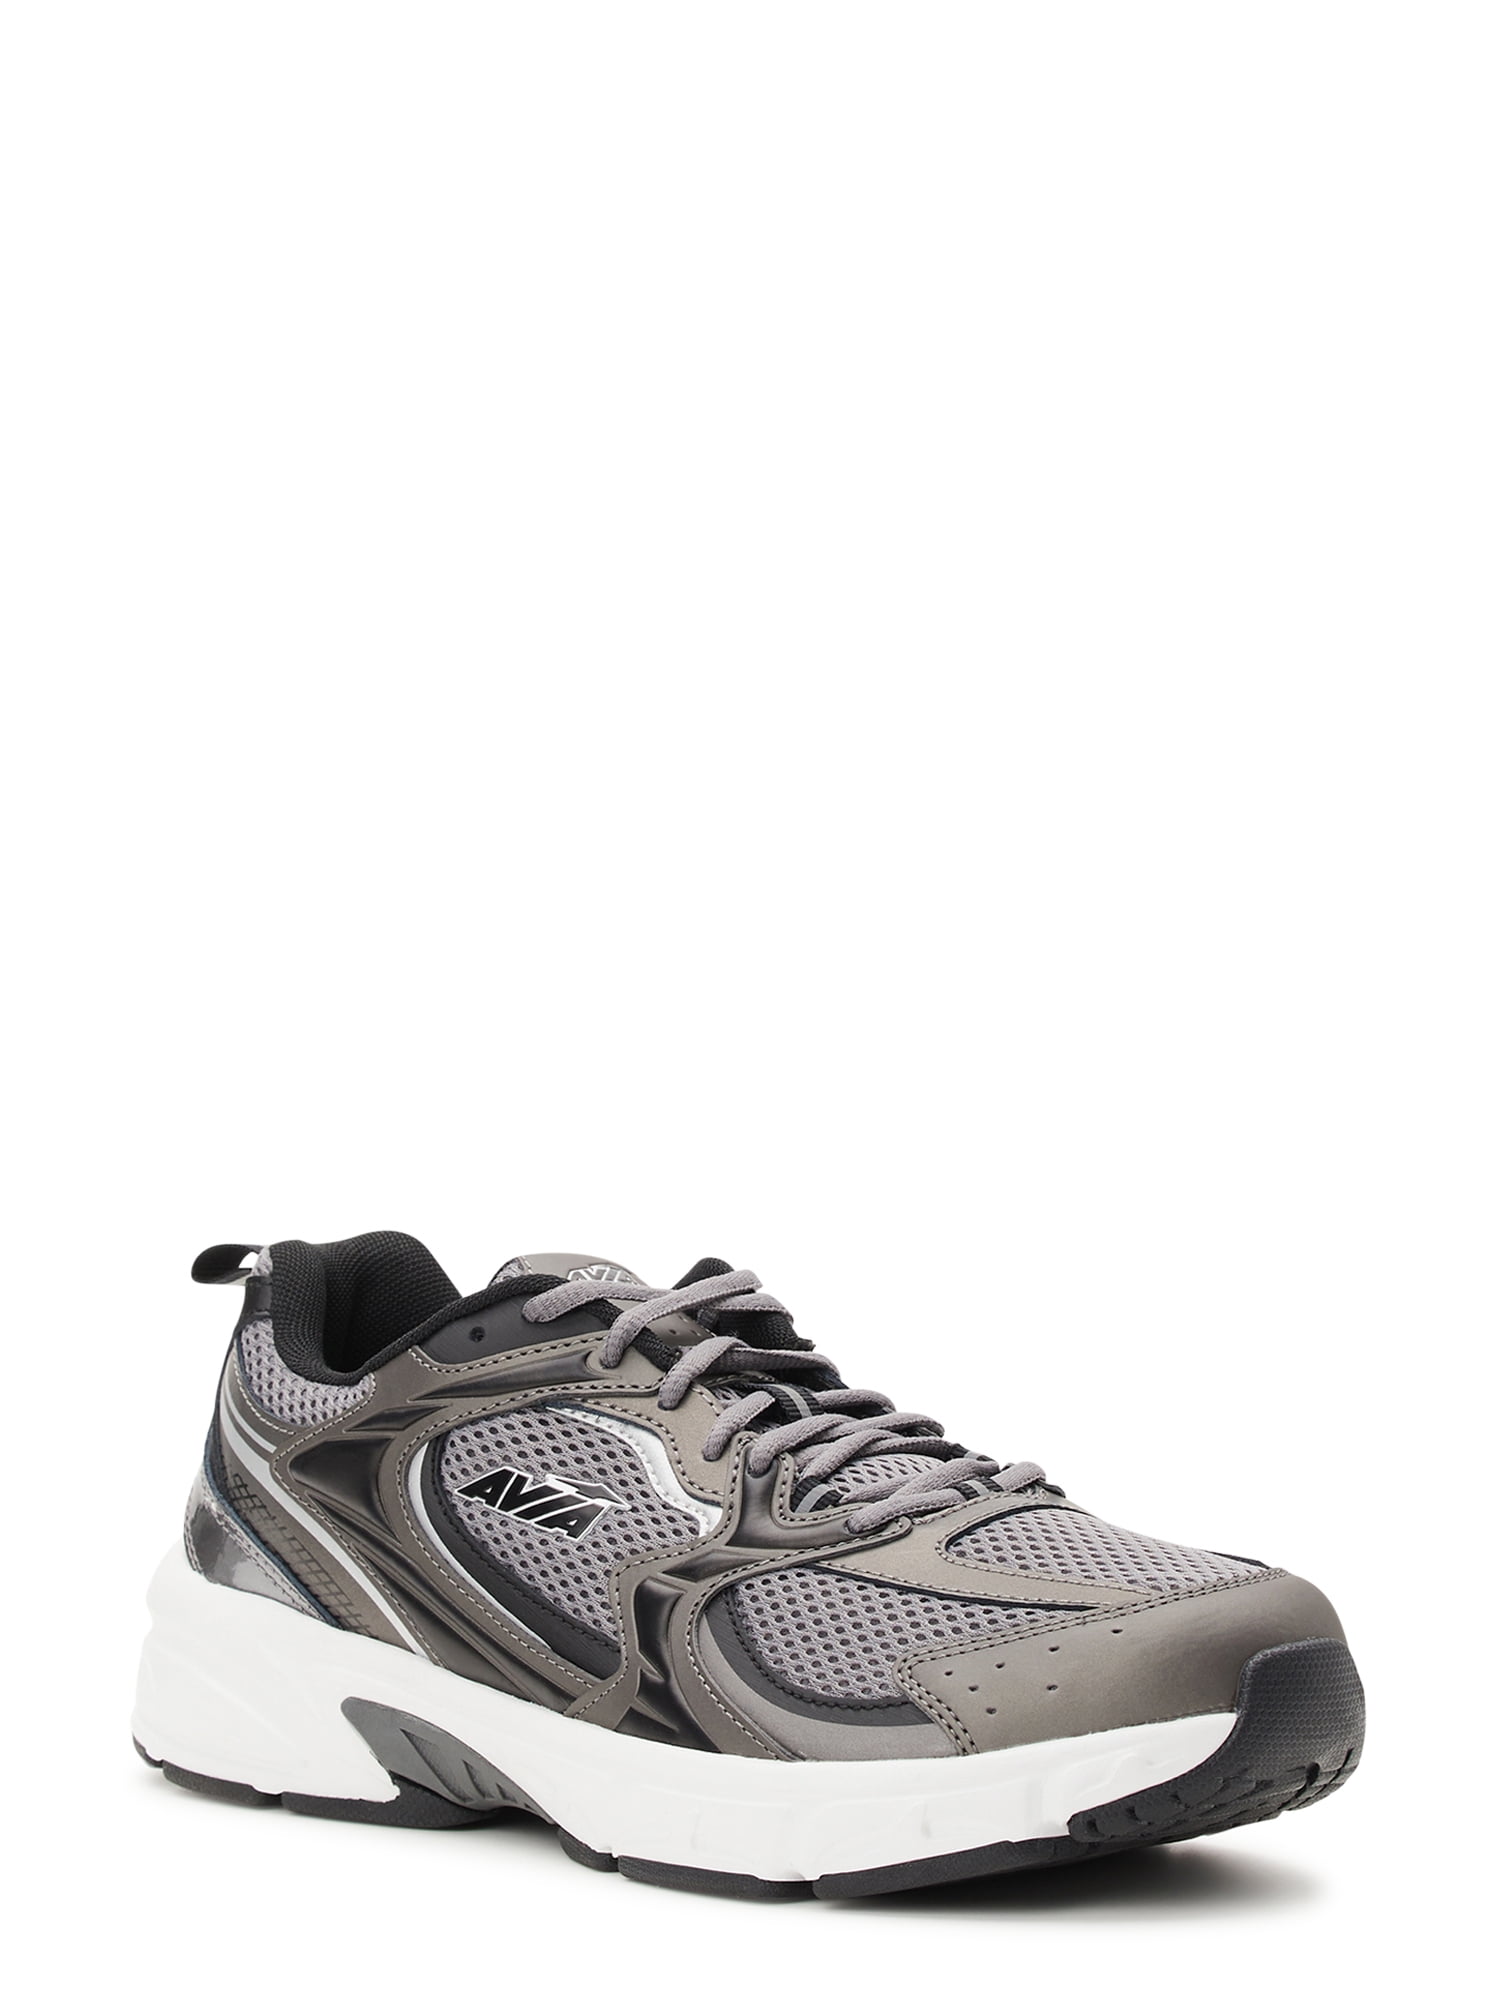 Find Your Perfect Avia Men's 5000 Performance Walking Sneakers ...